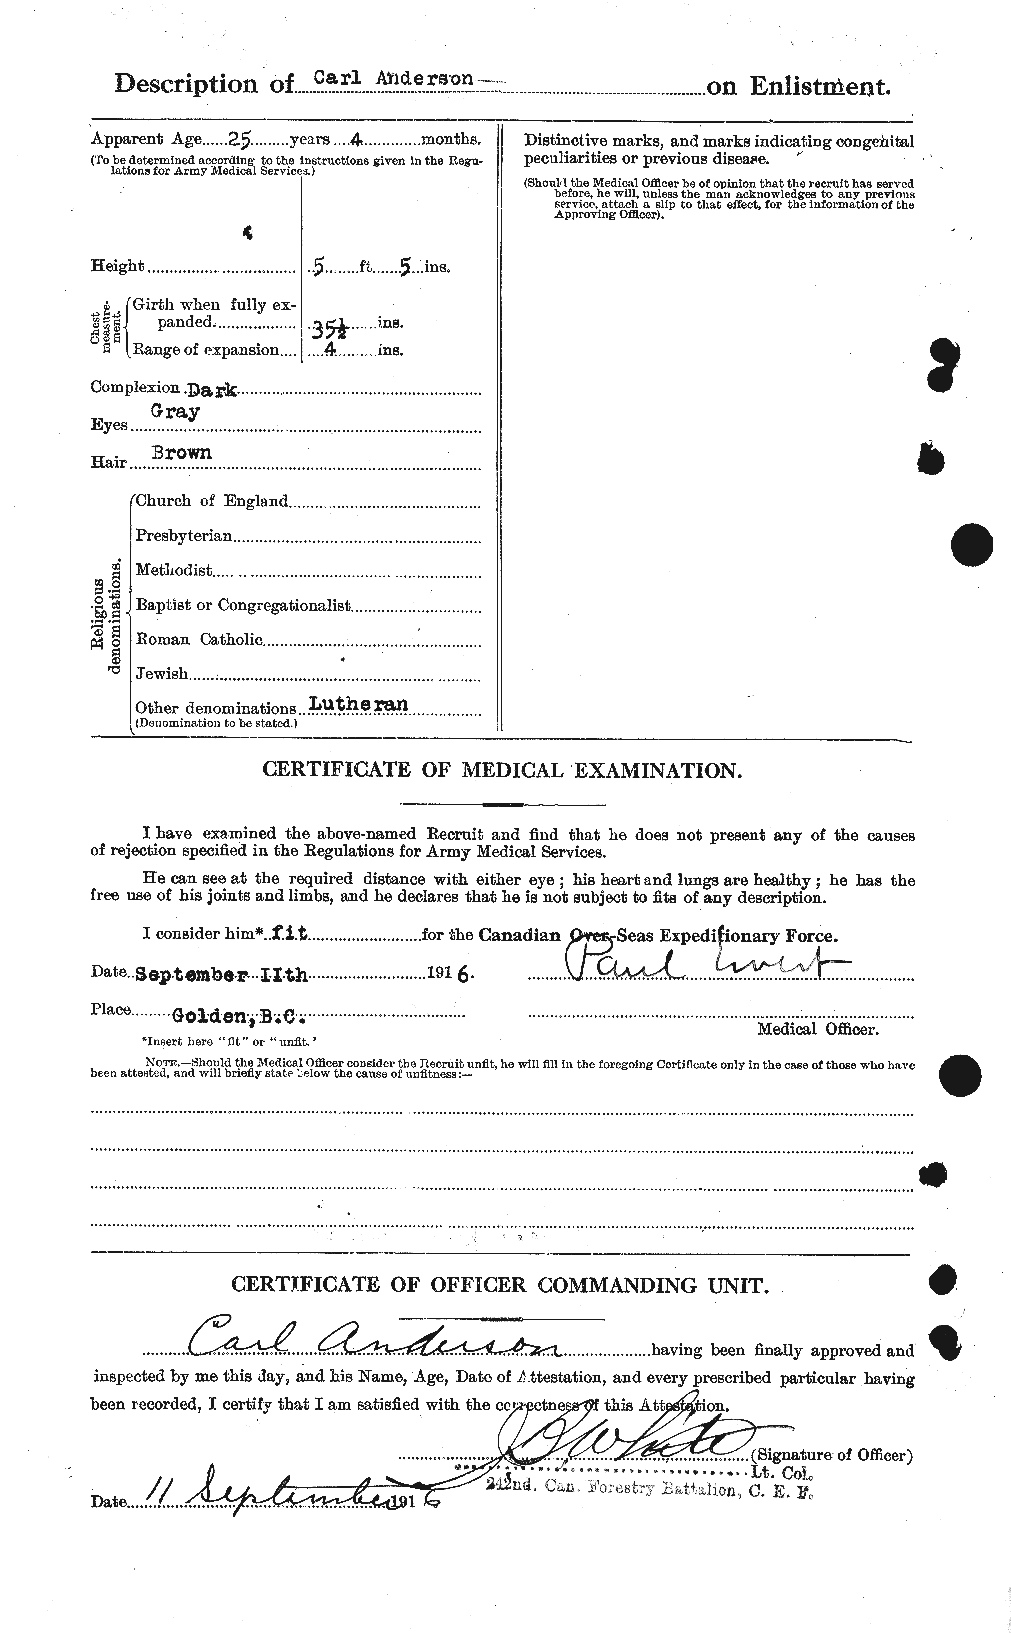 Personnel Records of the First World War - CEF 209288b